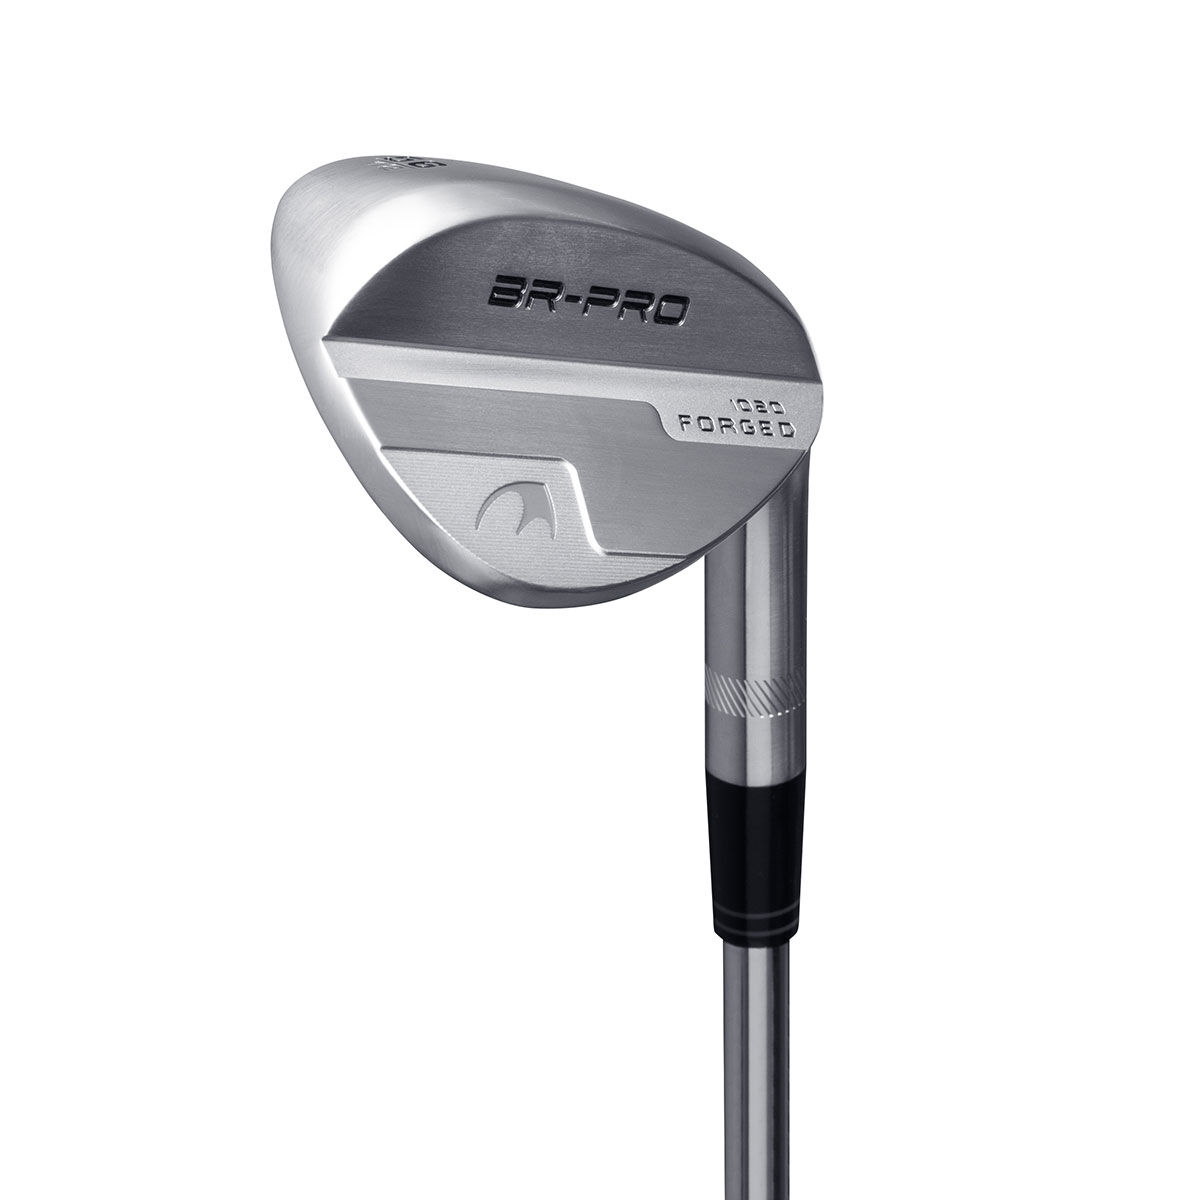 Benross Mens, Silver Br-Pro Forged Golf Wedge, Right Hand, 52°, Standard, Steel, Size: 52" | American Golf von Benross